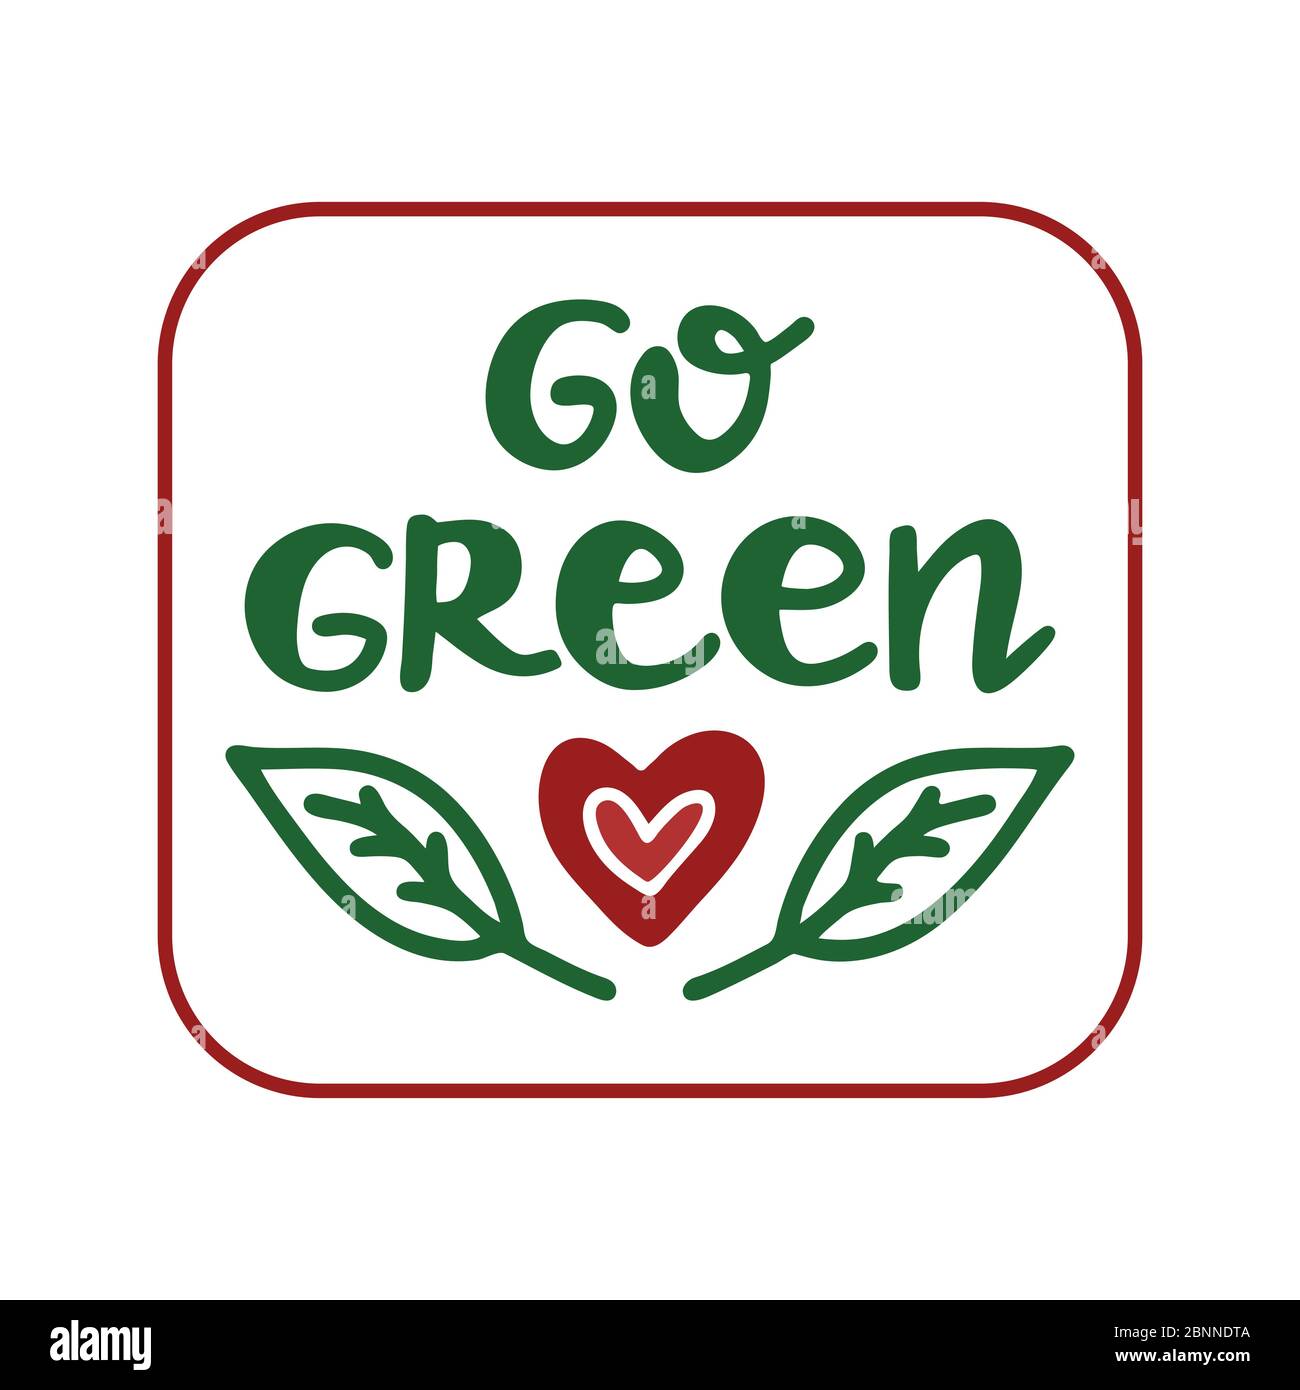 Go green. Handwritten ecological quote. Isolated on white background. Vector stock illustration. Stock Vector